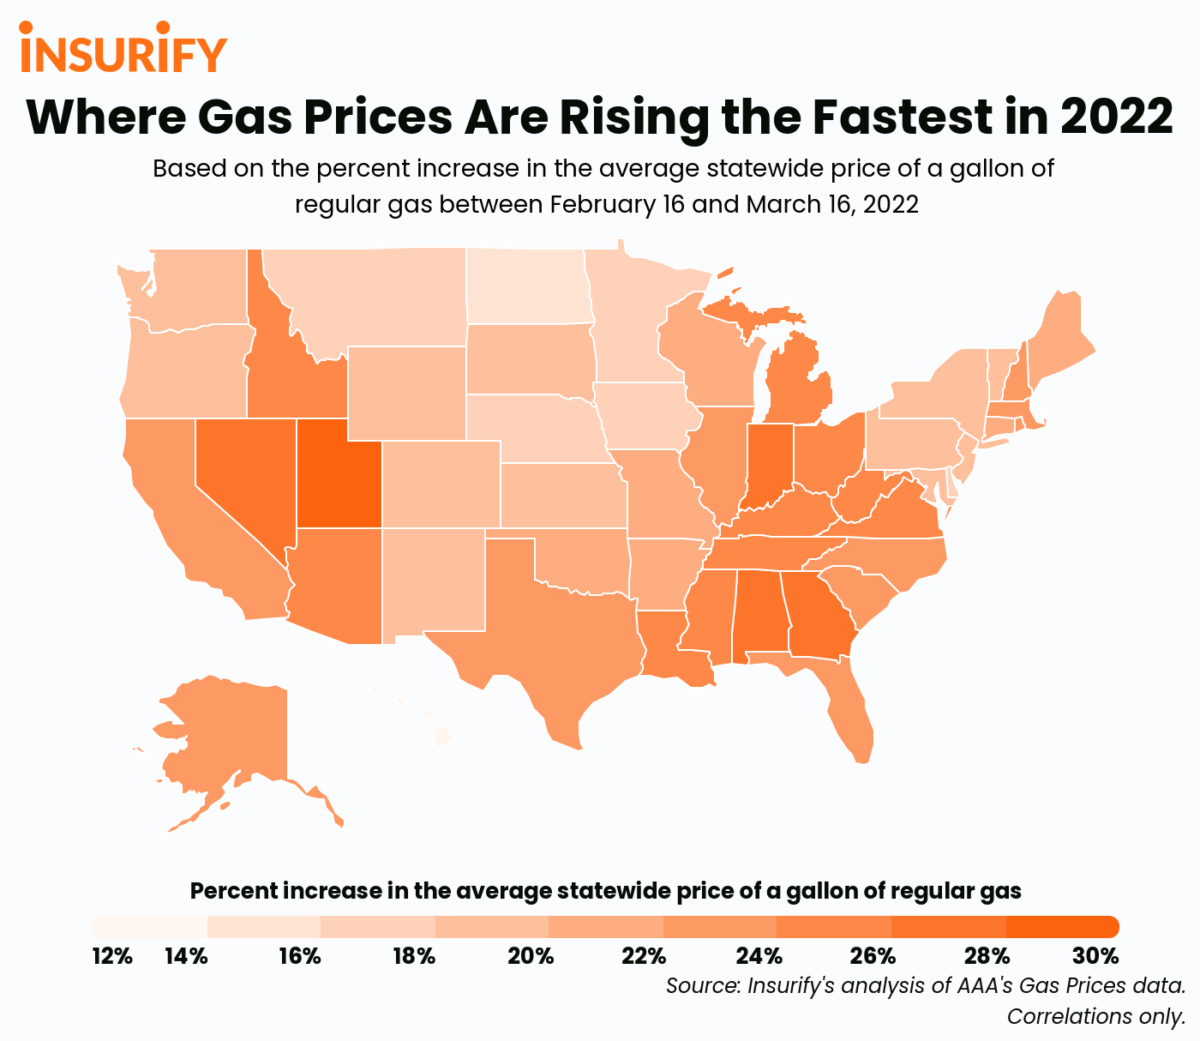 Heat map of US states showing where gas prices are rising the fastest in March 2022.